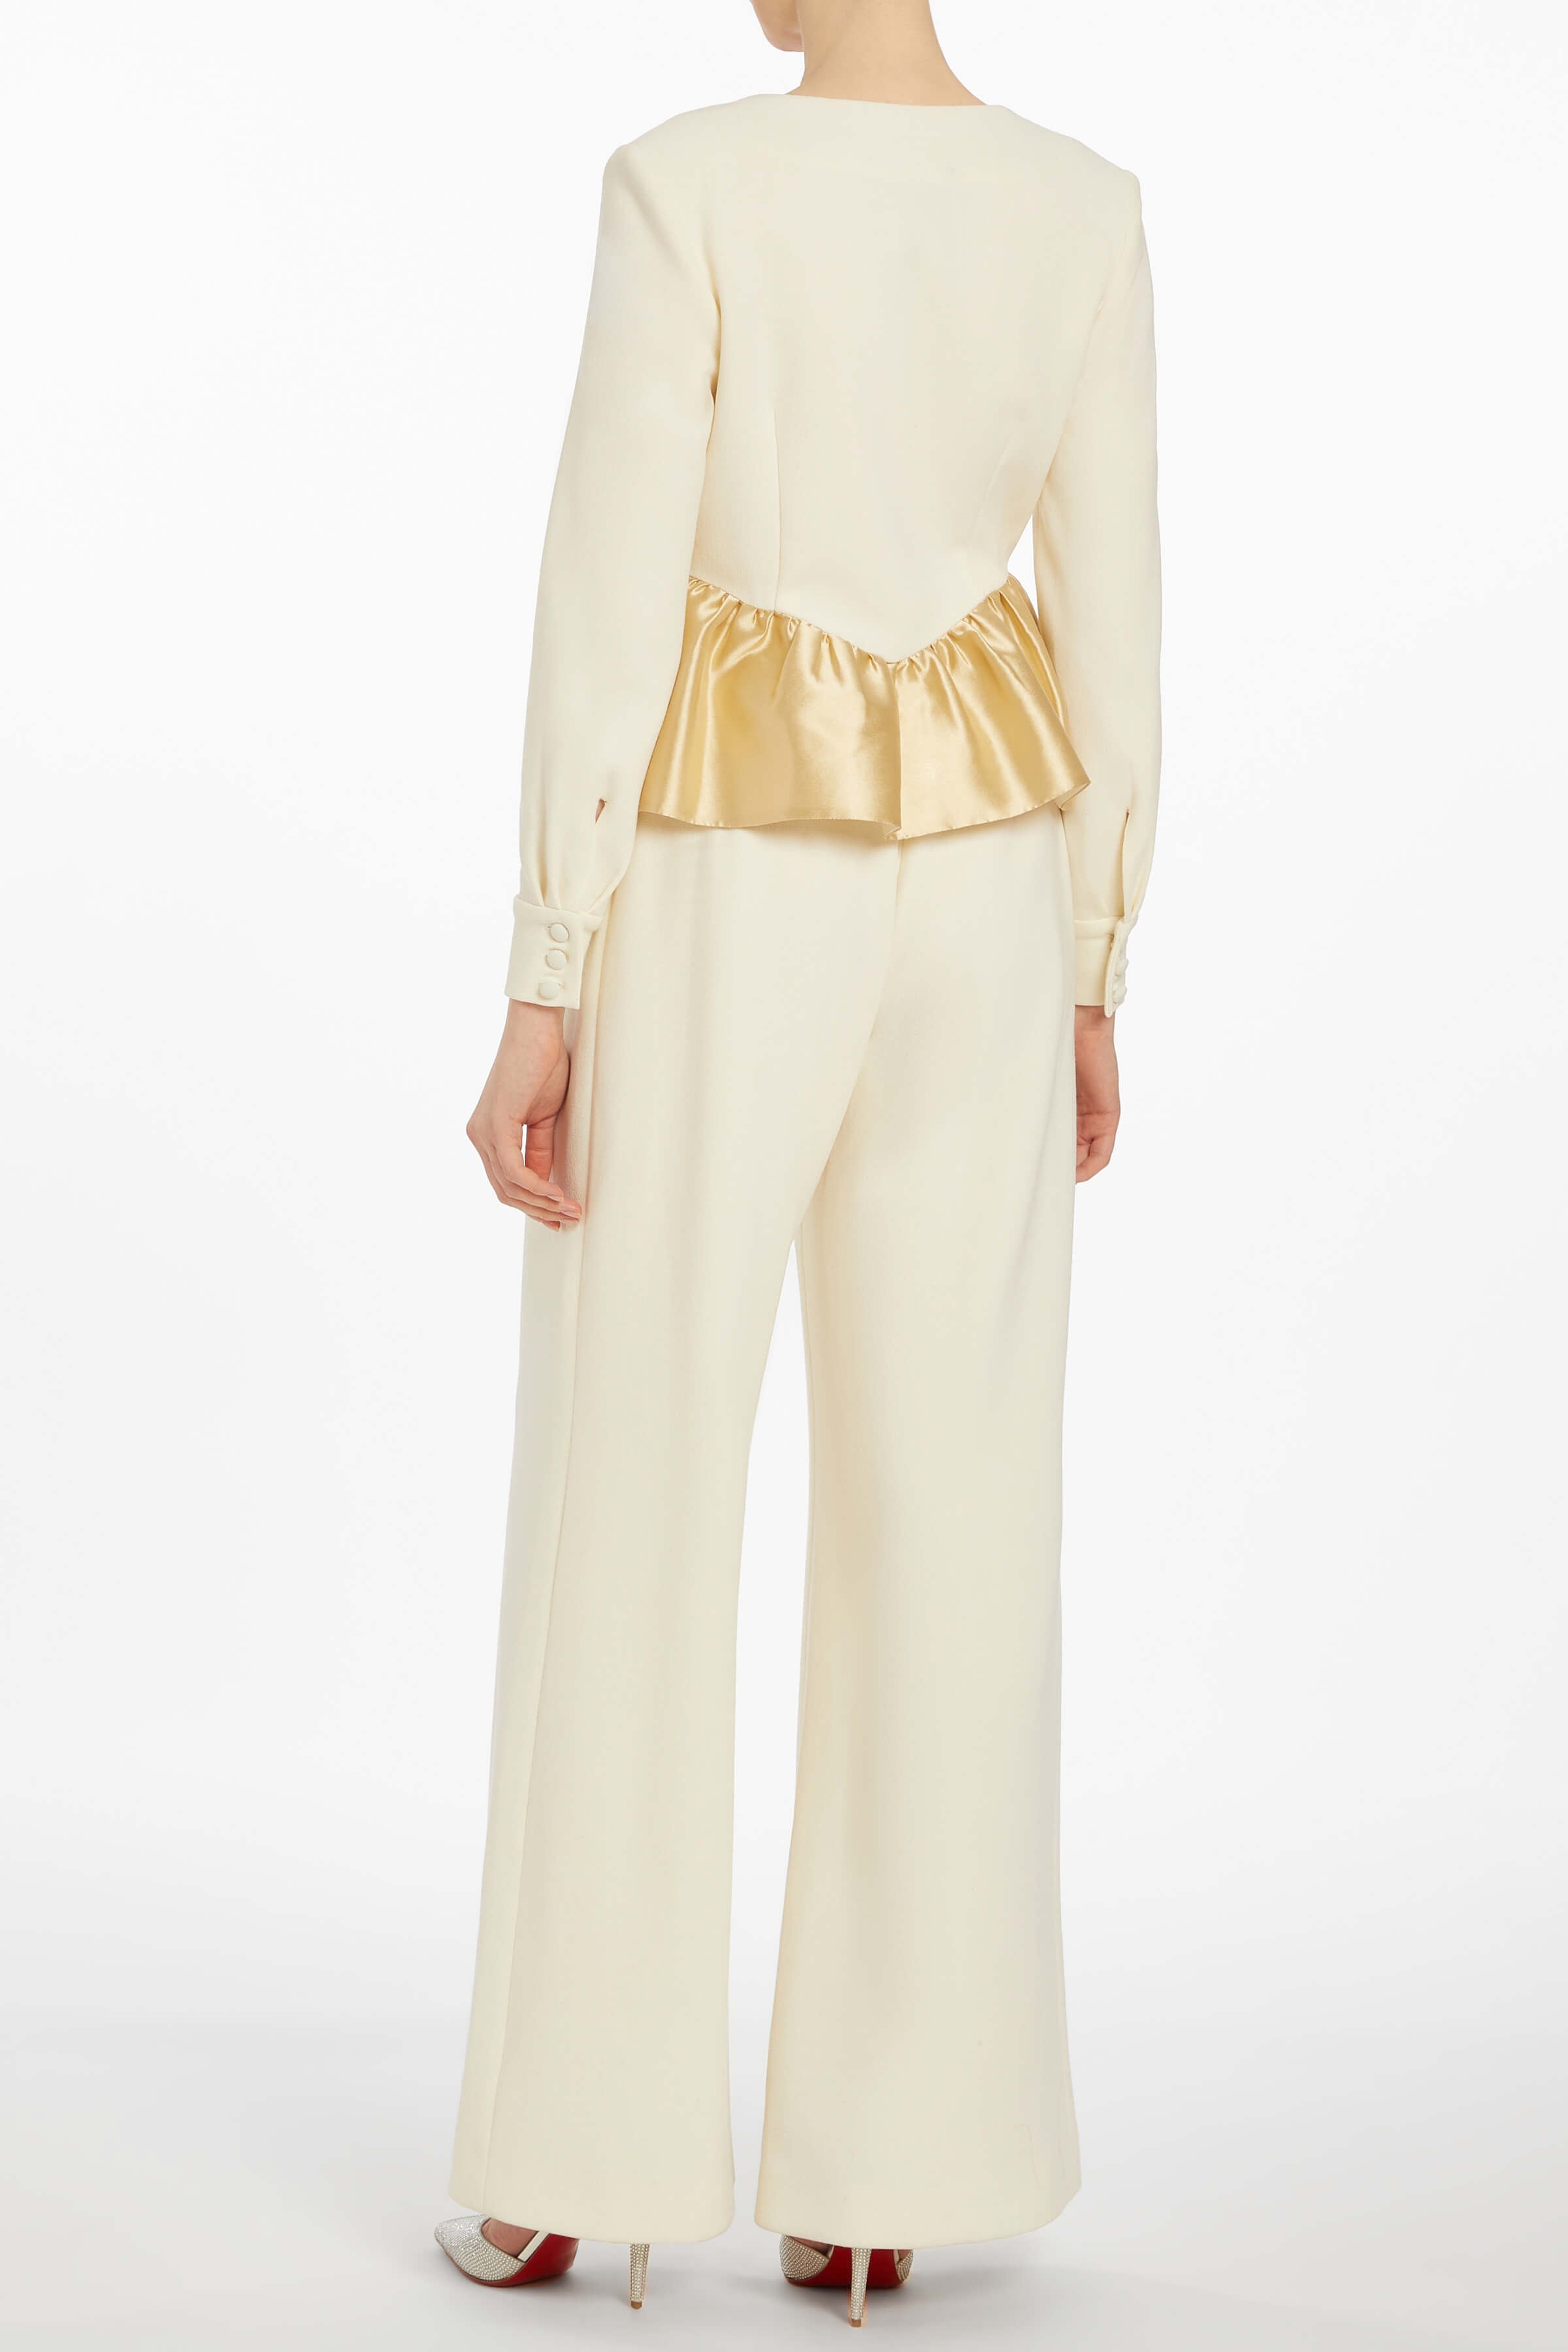 Lily Ivory Crepe Pant